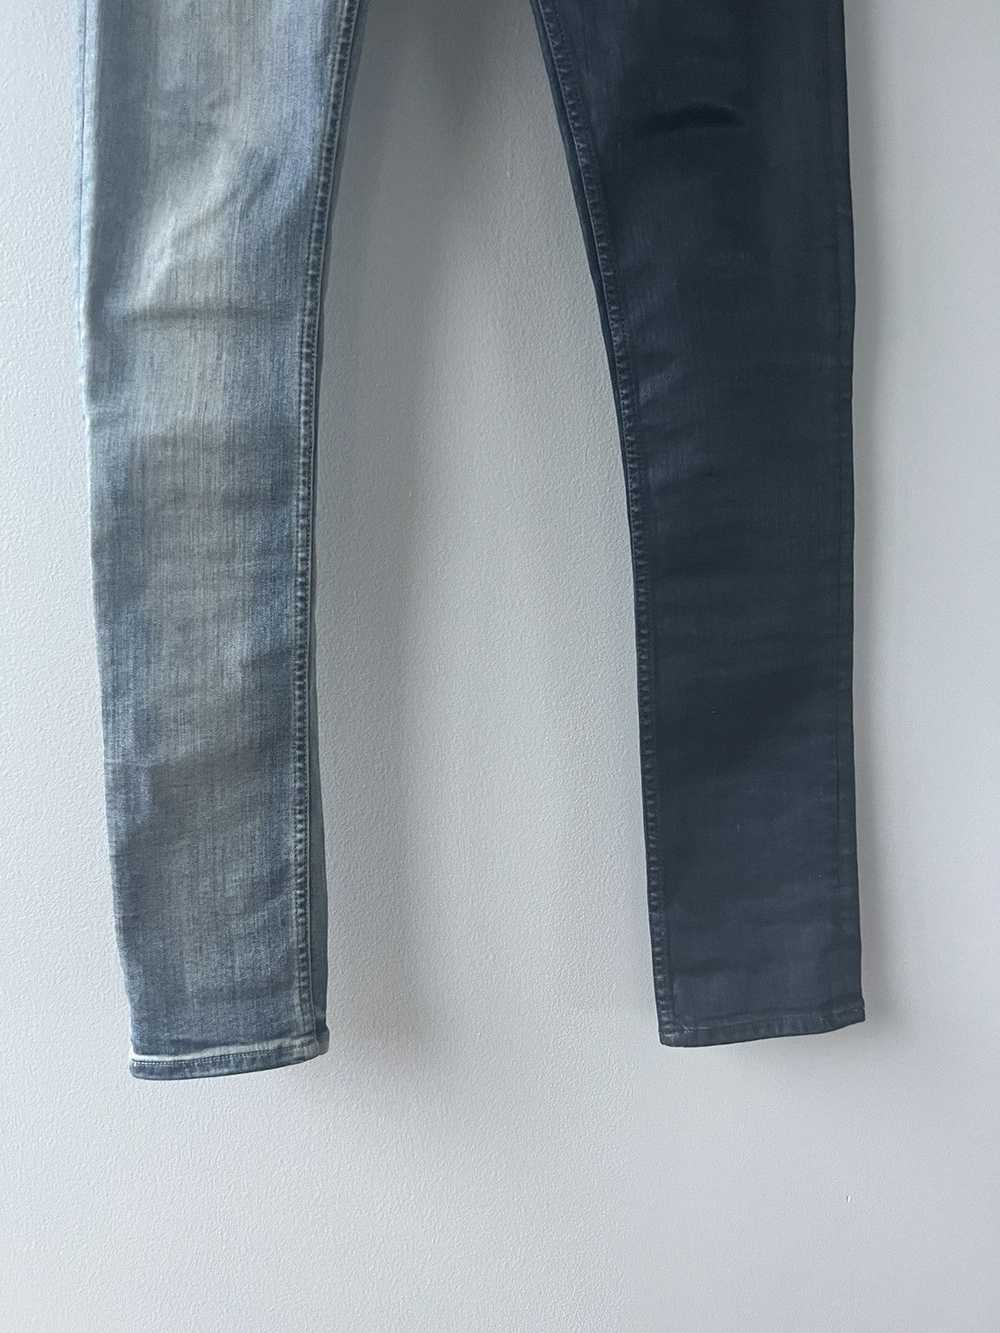 Rick Owens SS19 BABEL Combo Tyrone Jeans - image 4